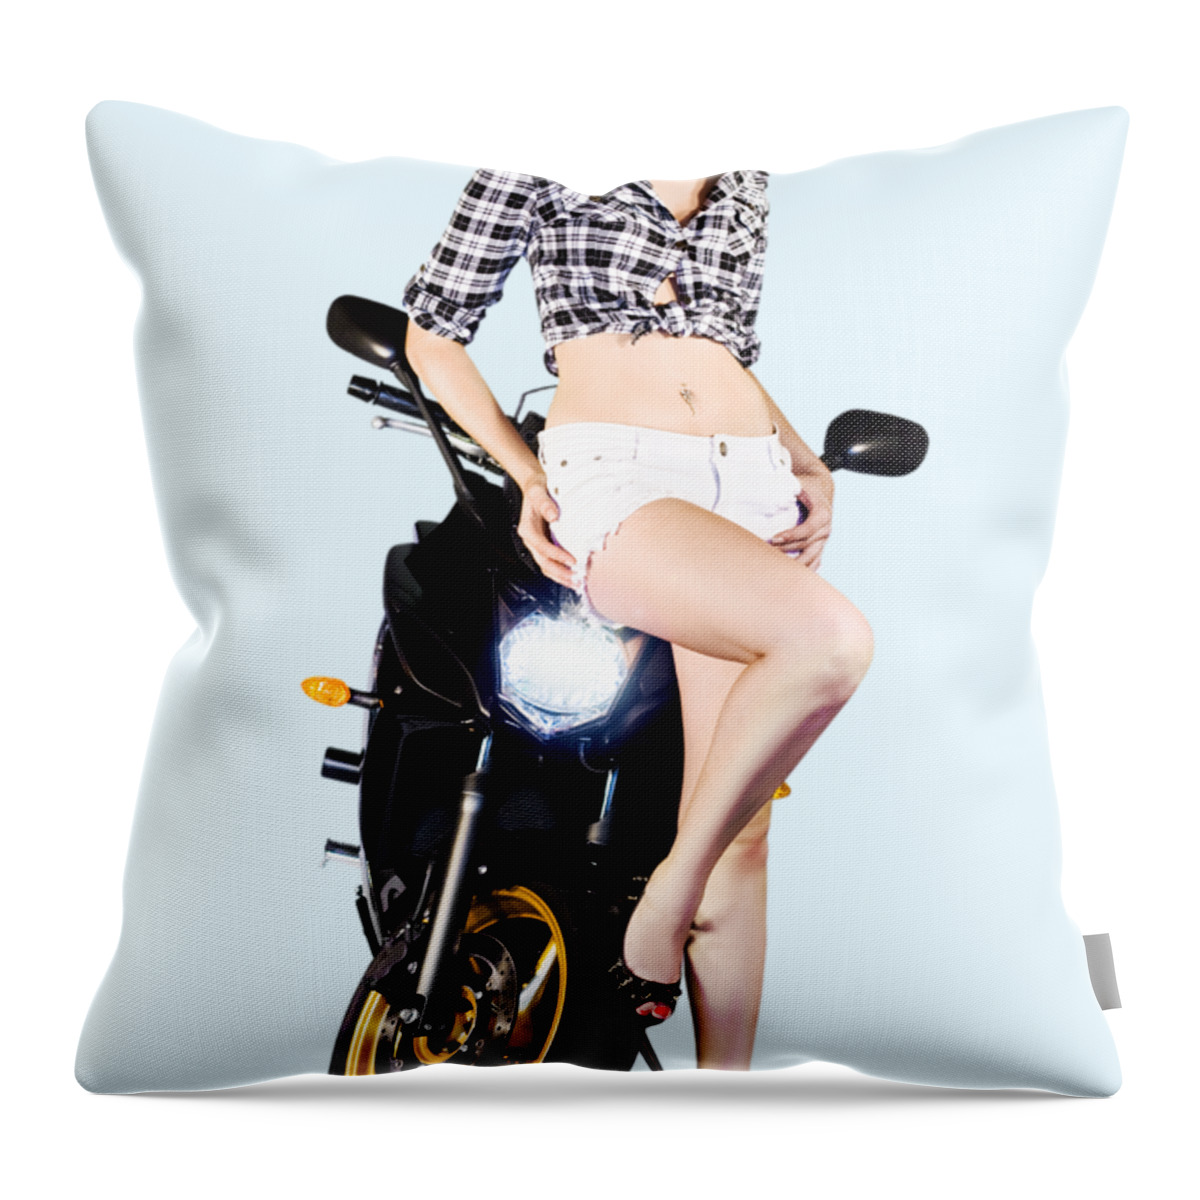 Motorbike Throw Pillow featuring the photograph Woman Leaning On A Motorbike by Jorgo Photography